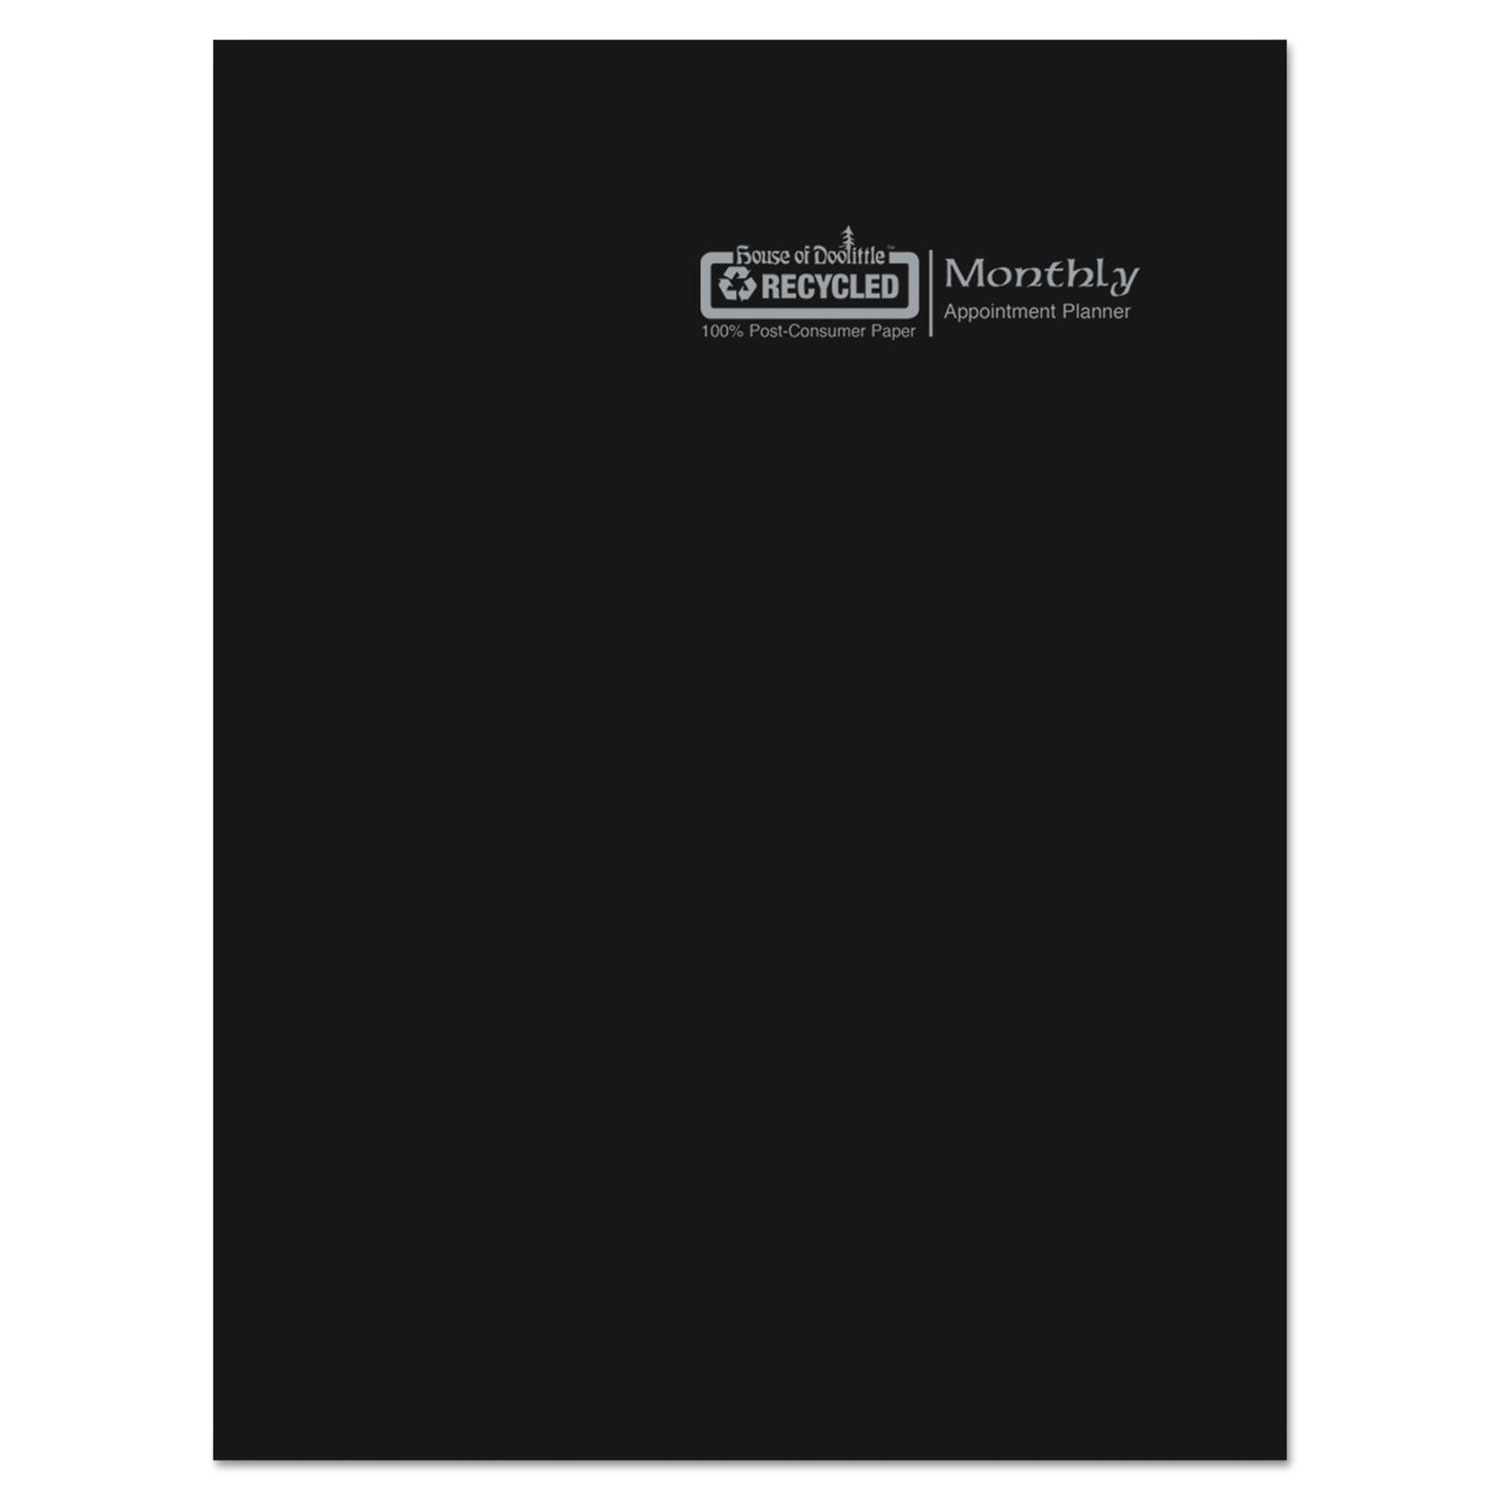 Recycled Ruled Planner with Stitched Leatherette Cover, 8.5x11, Black, 2017-2019